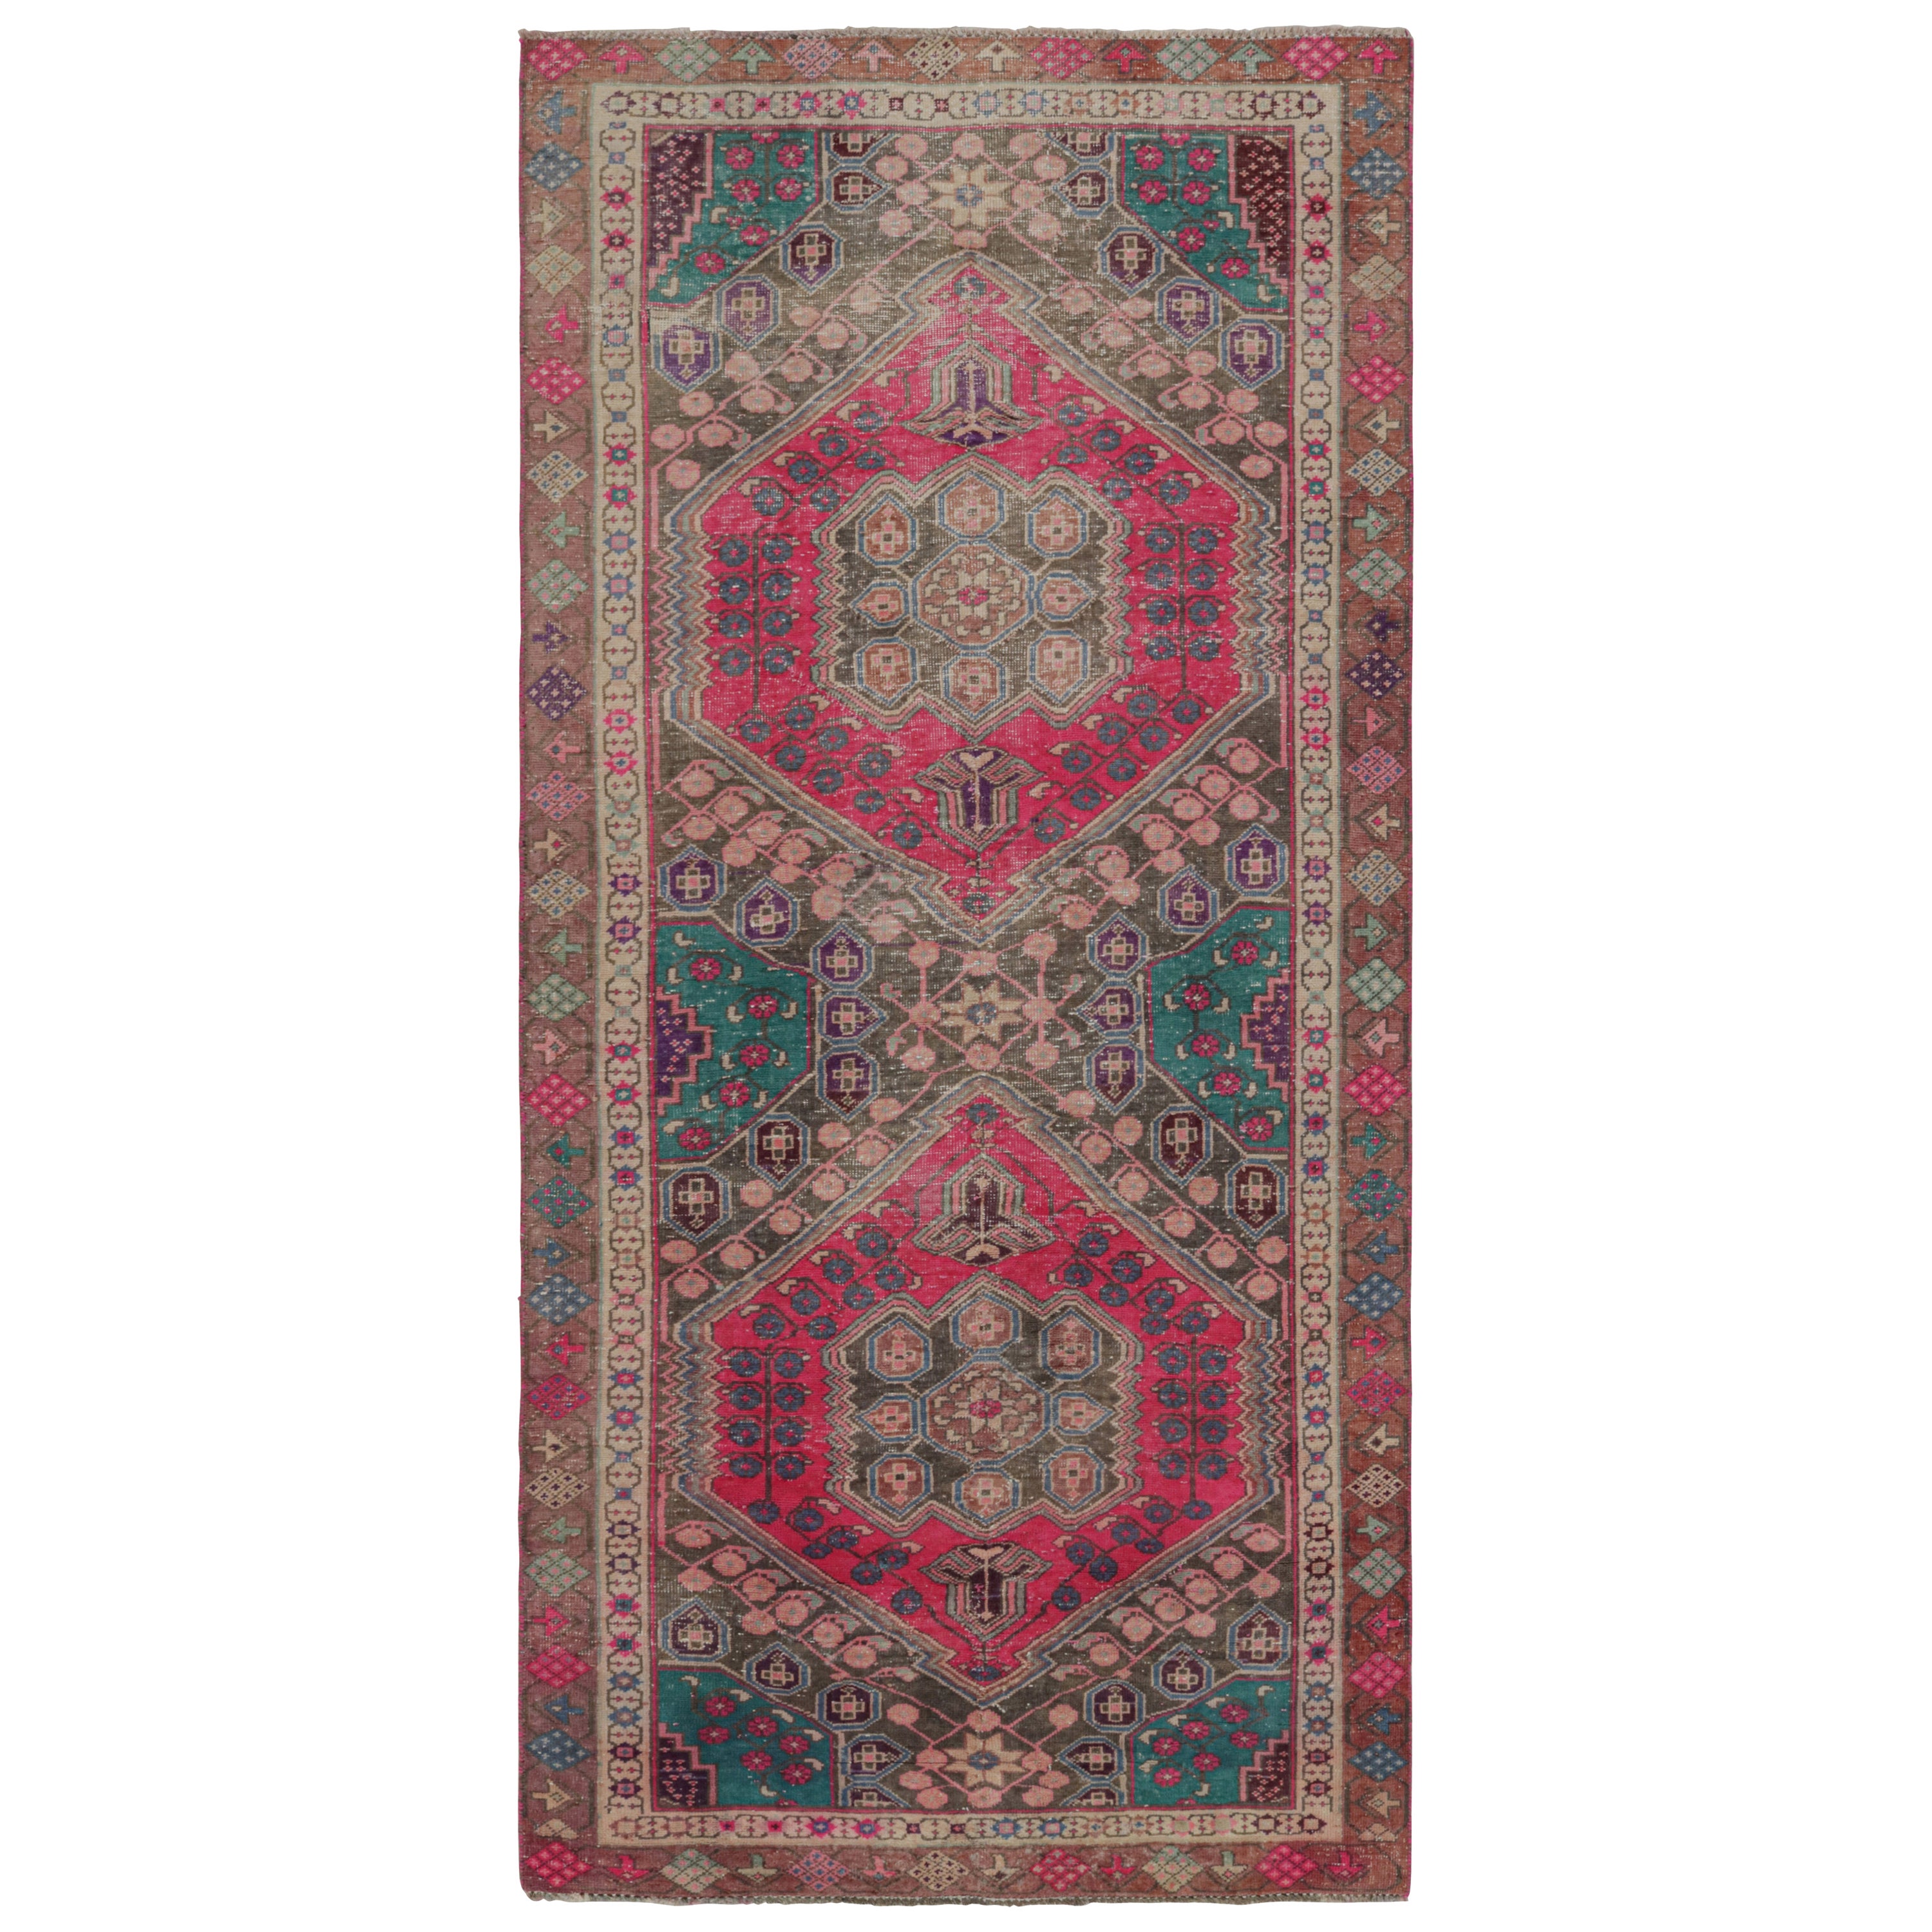 Vintage Persian Shiraz rug in Pink and Teal Floral Patterns by Rug & Kilim For Sale